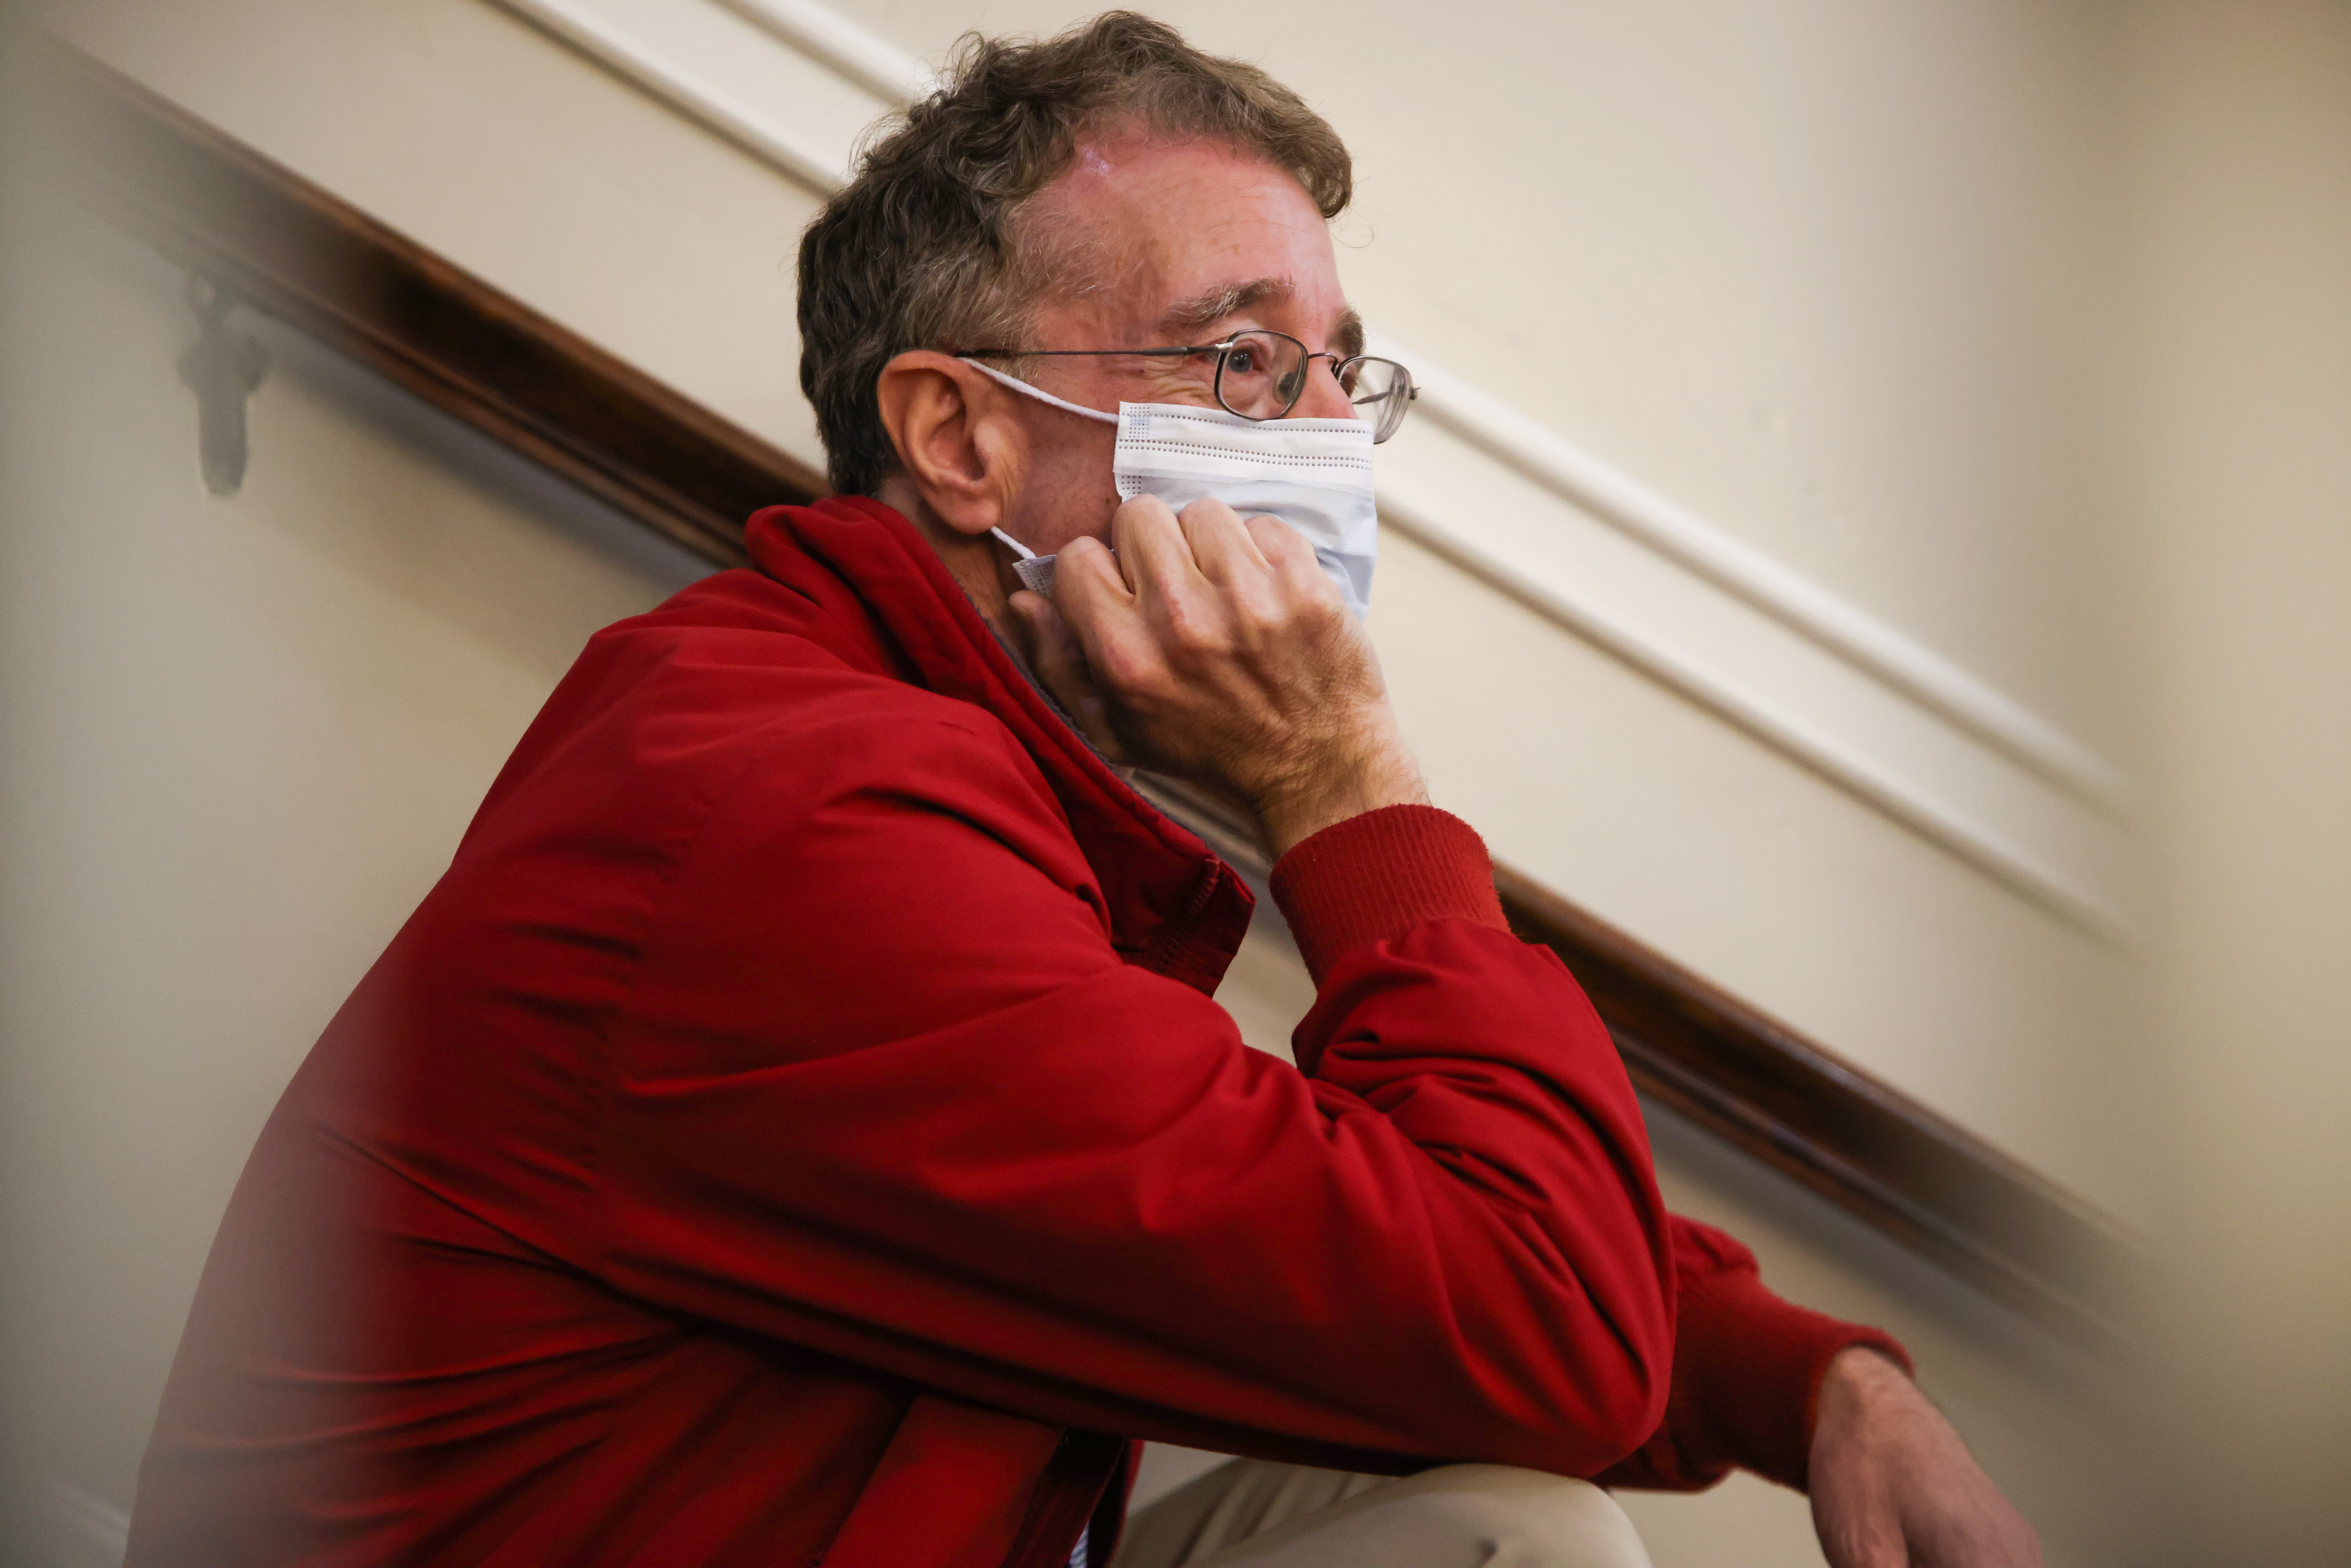 Mayoral candidate Marc Warner awaits preliminary election results Sept. 28, 2021, at Northampton City Hall. (Hoang 'Leon' Nguyen / The Republican)